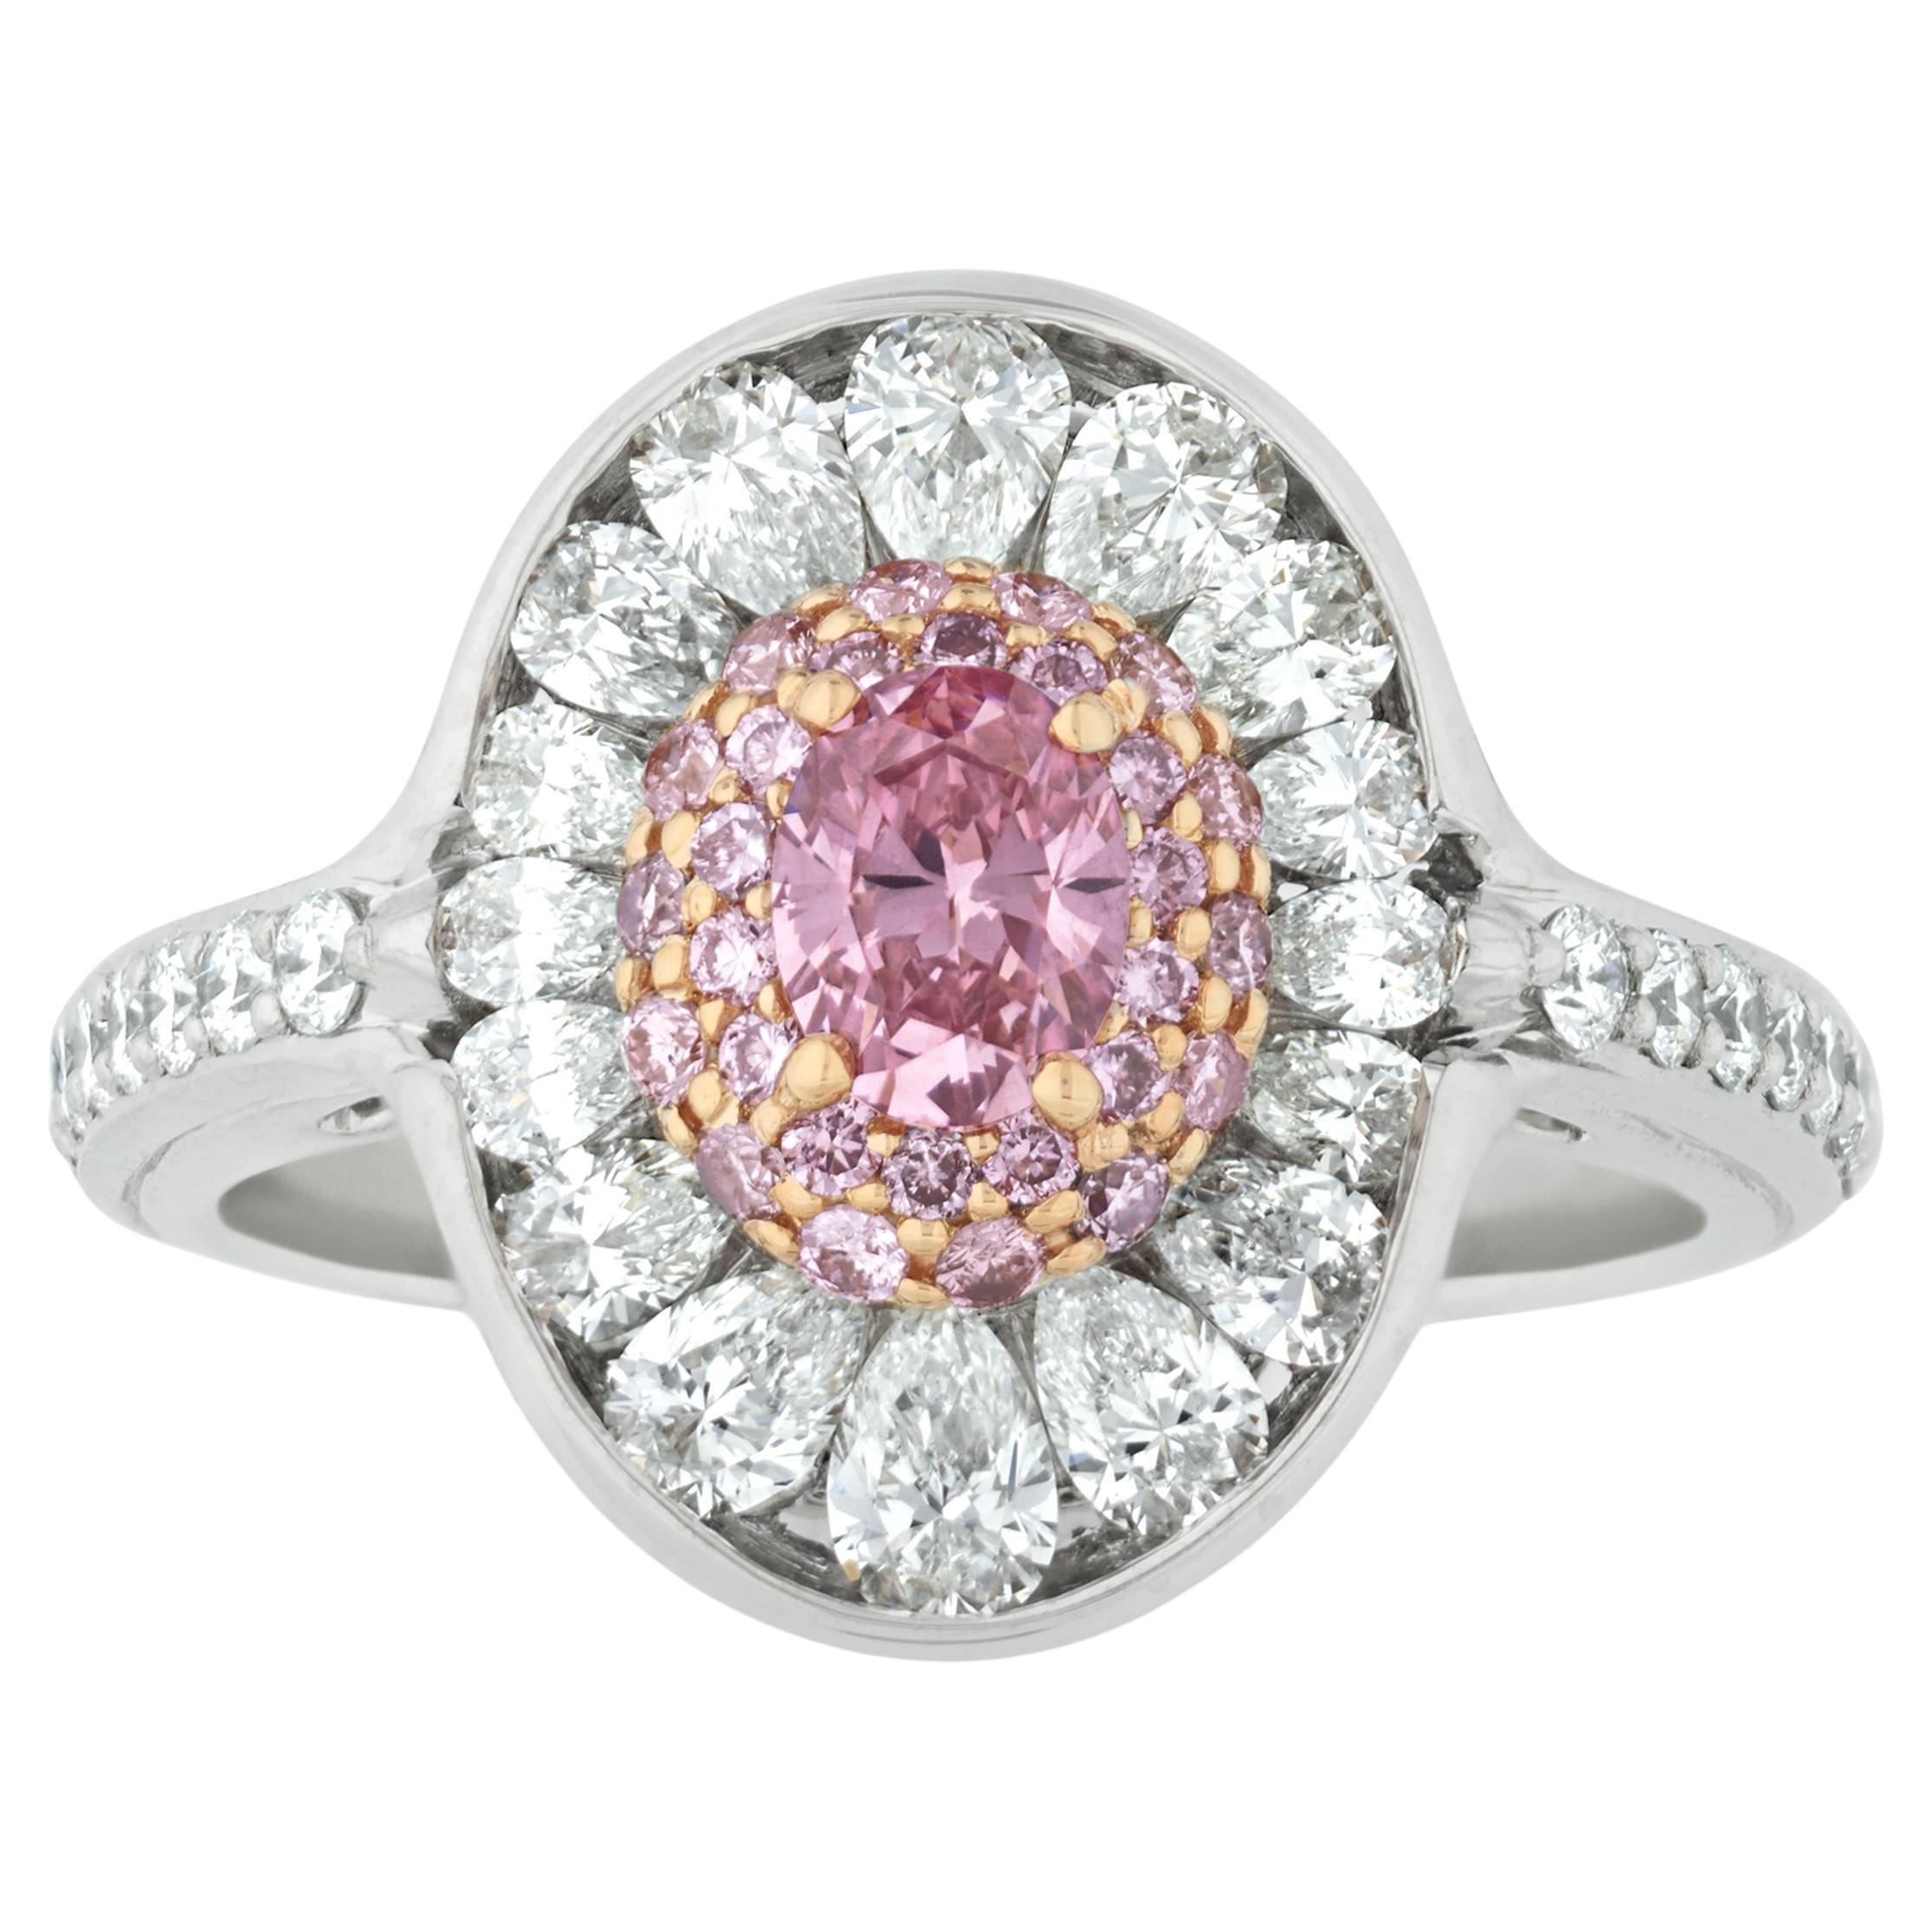 Fancy Vivid Pink And White Diamond Ring For Sale